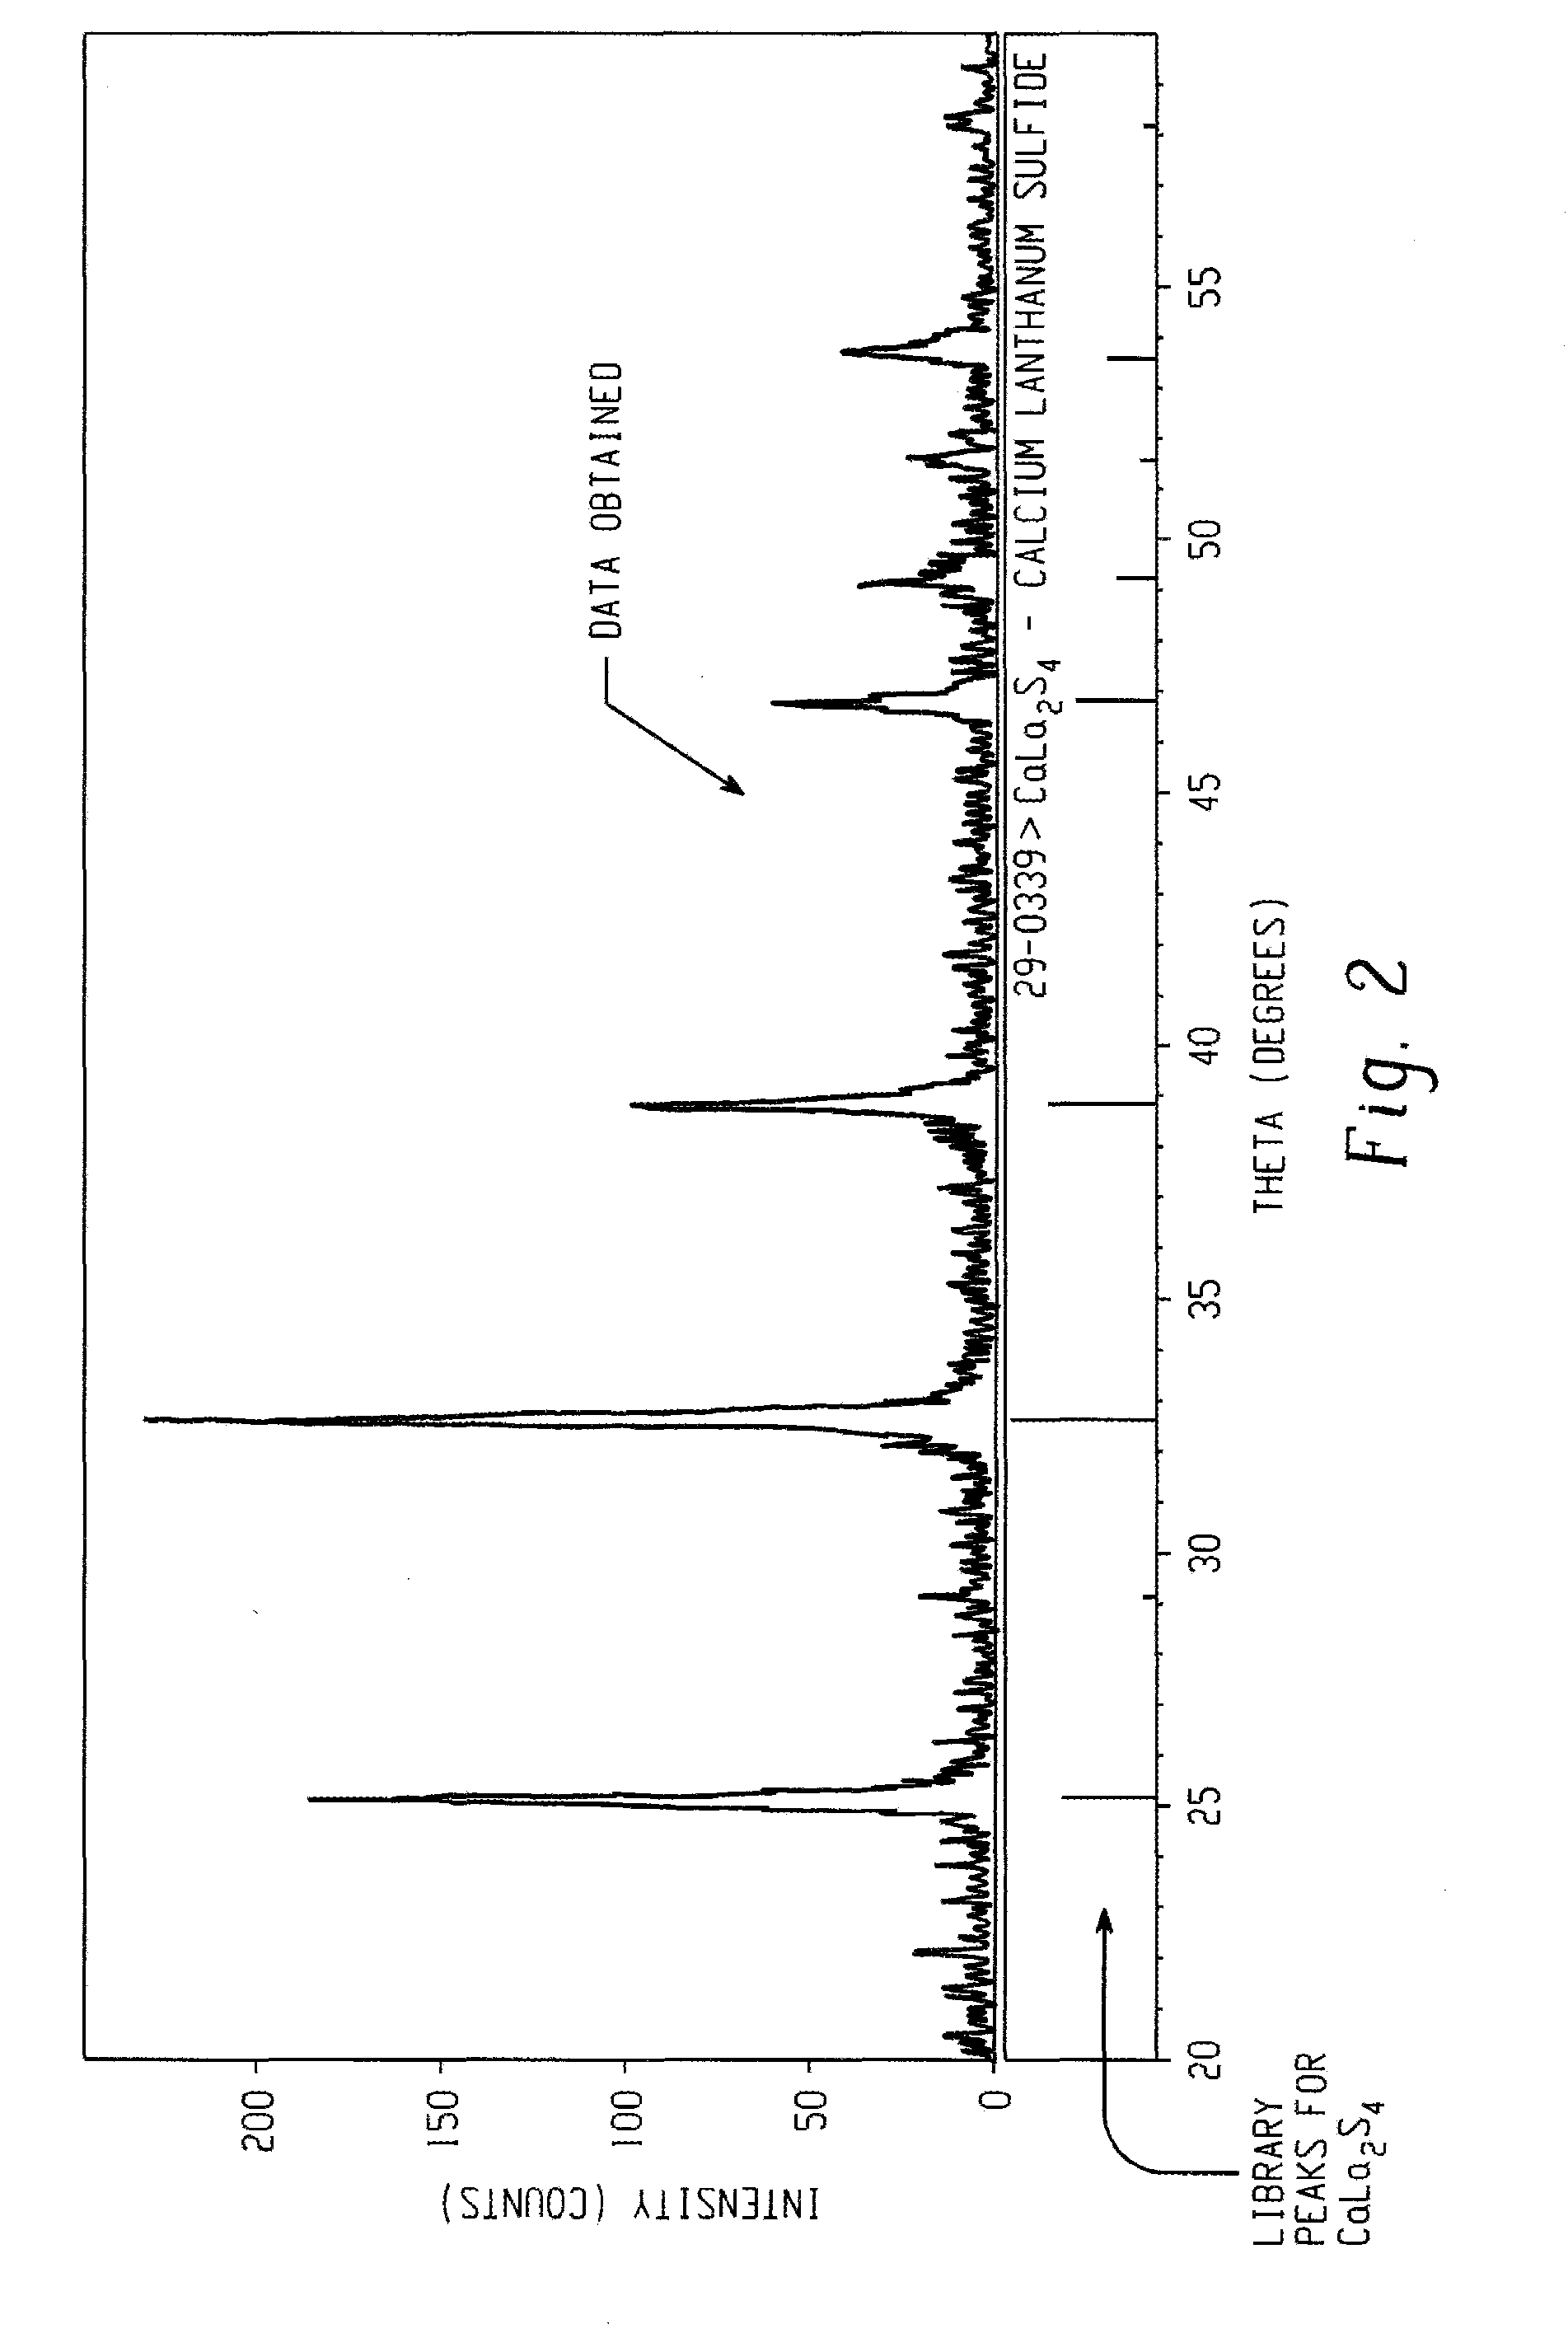 Calcium lanthanoid sulfide powders, methods of making, and ceramic bodies formed therefrom